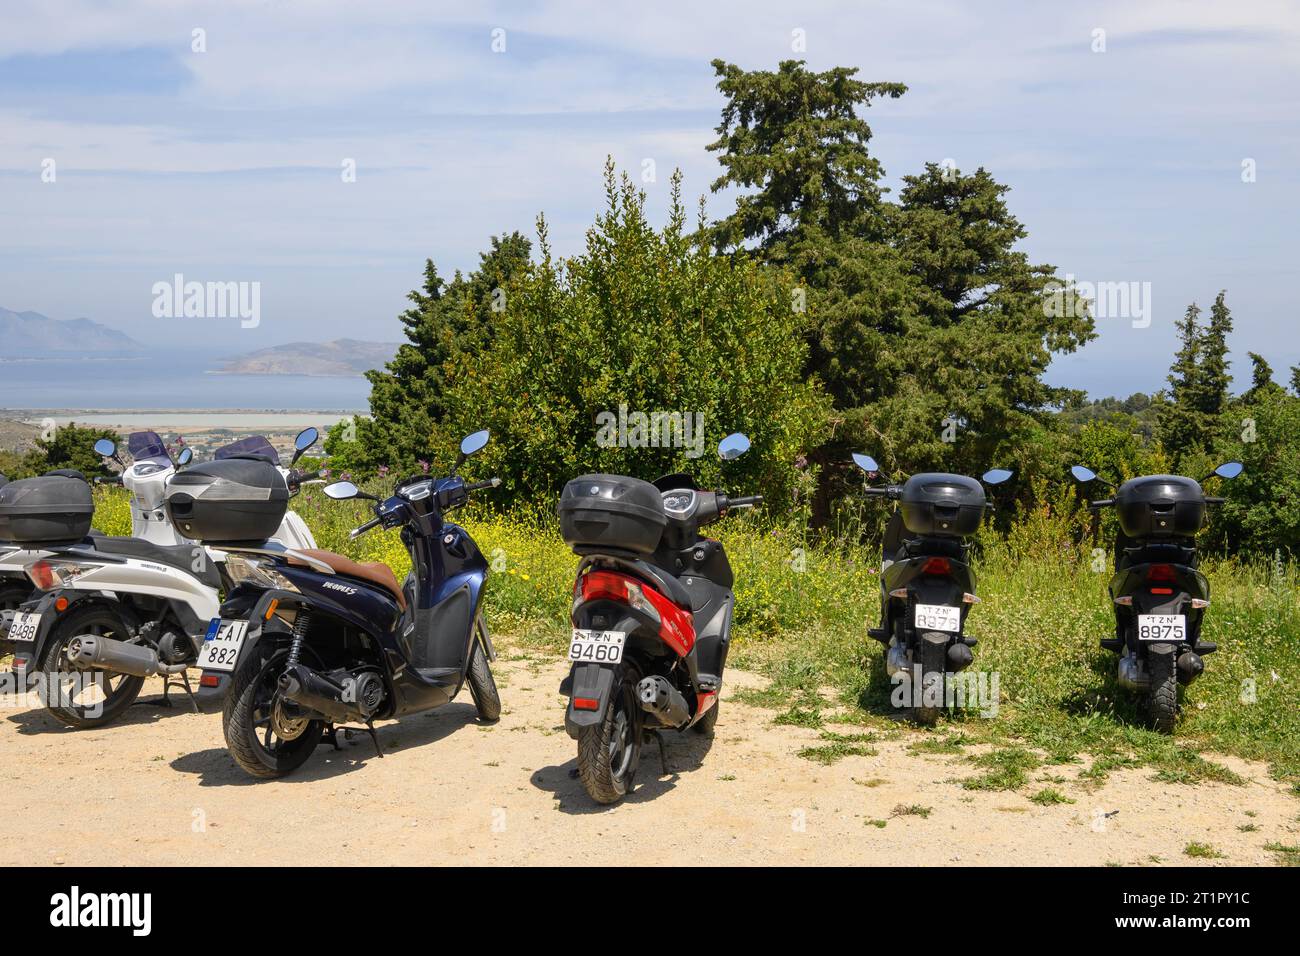 Kos, Greece - May 9, 2023: Parking space for motorcycles next to the village of Zia on the island of Kos. Greece Stock Photo